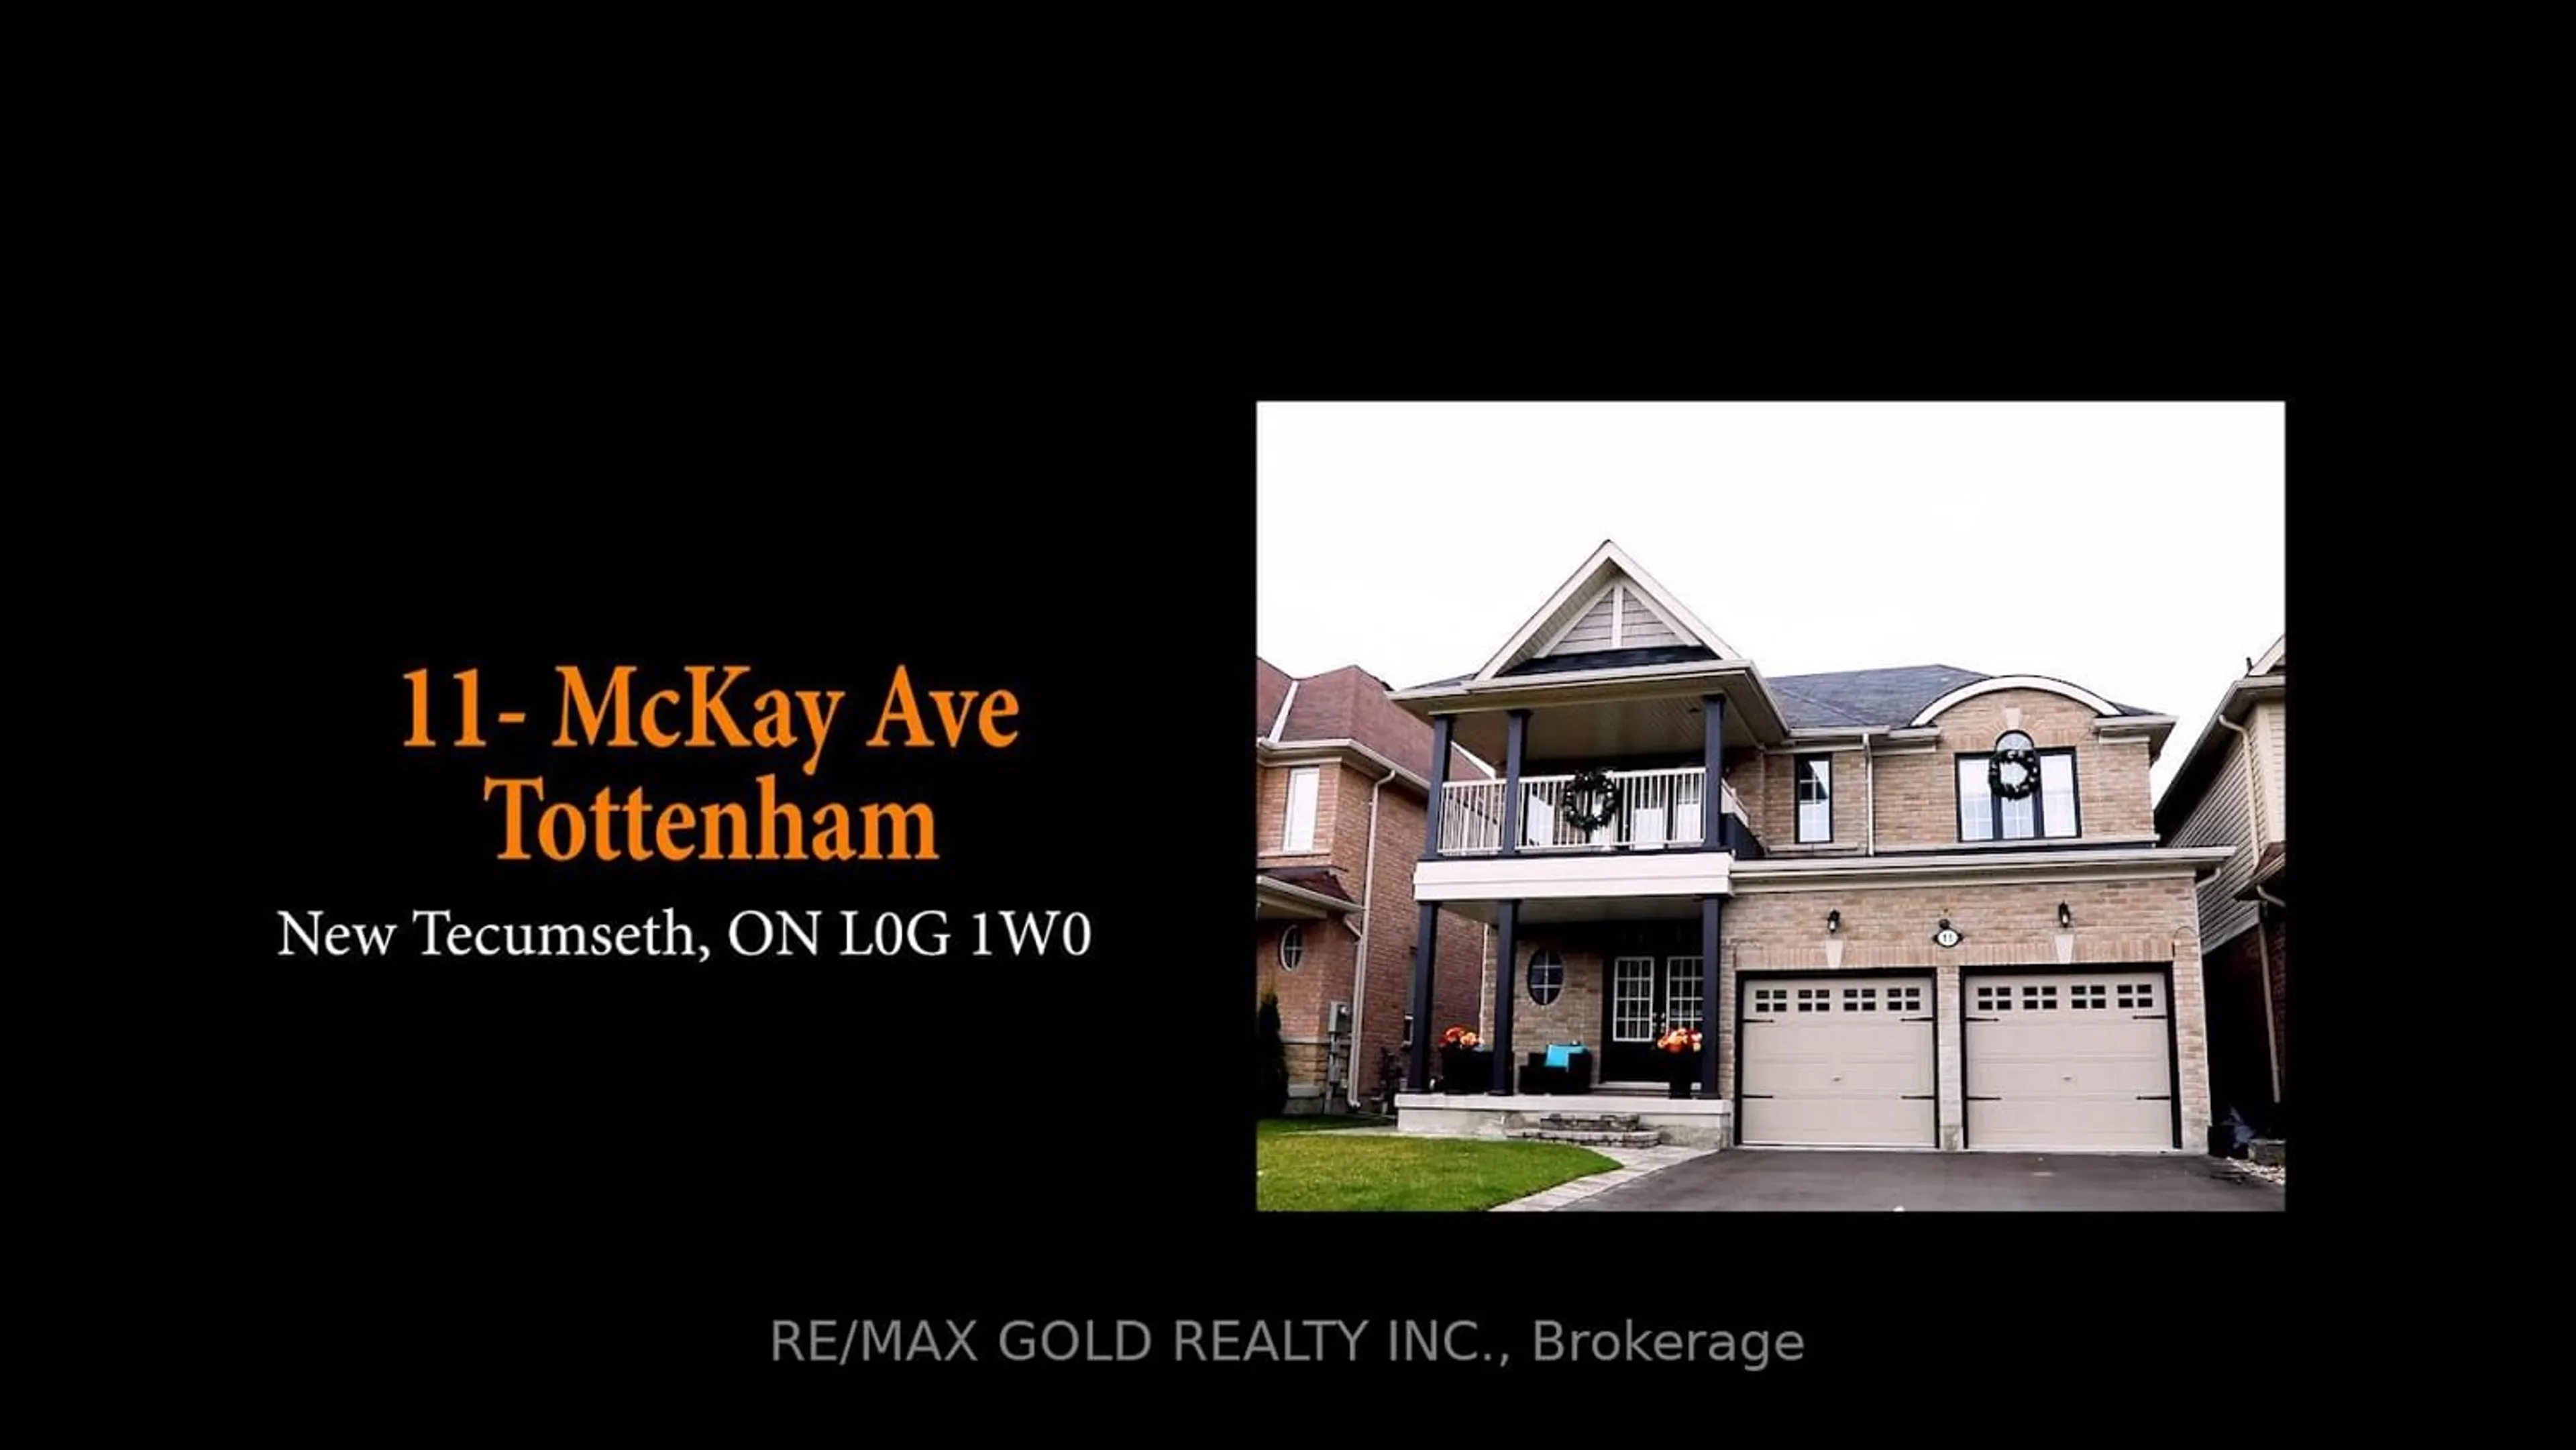 A pic from exterior of the house or condo for 11 Mckay Ave, New Tecumseth Ontario L0G 1W0